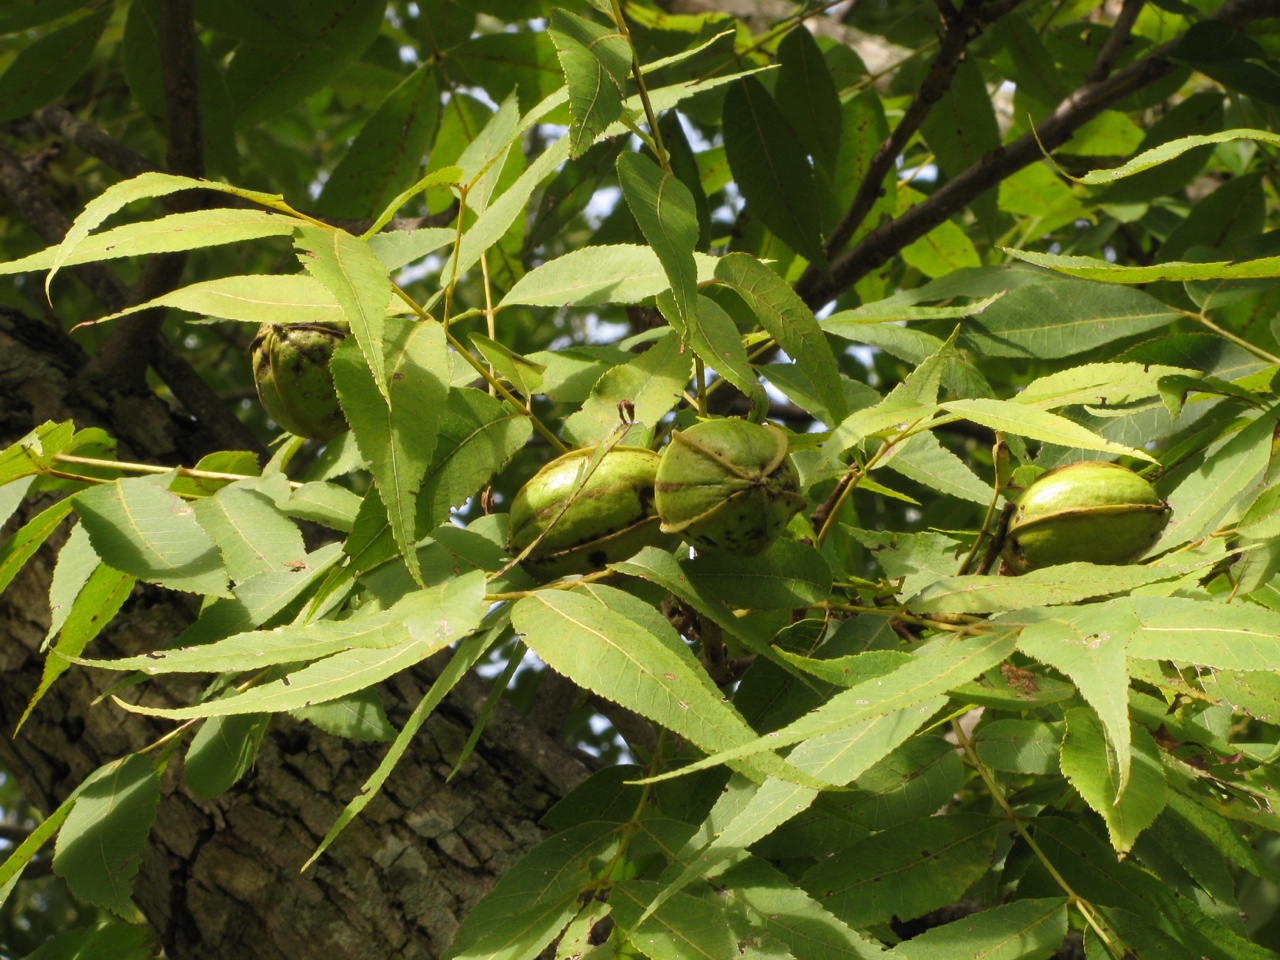 The Scientific Name is Carya illinoinensis. You will likely hear them called Pecan. This picture shows the Fruit in late September of Carya illinoinensis